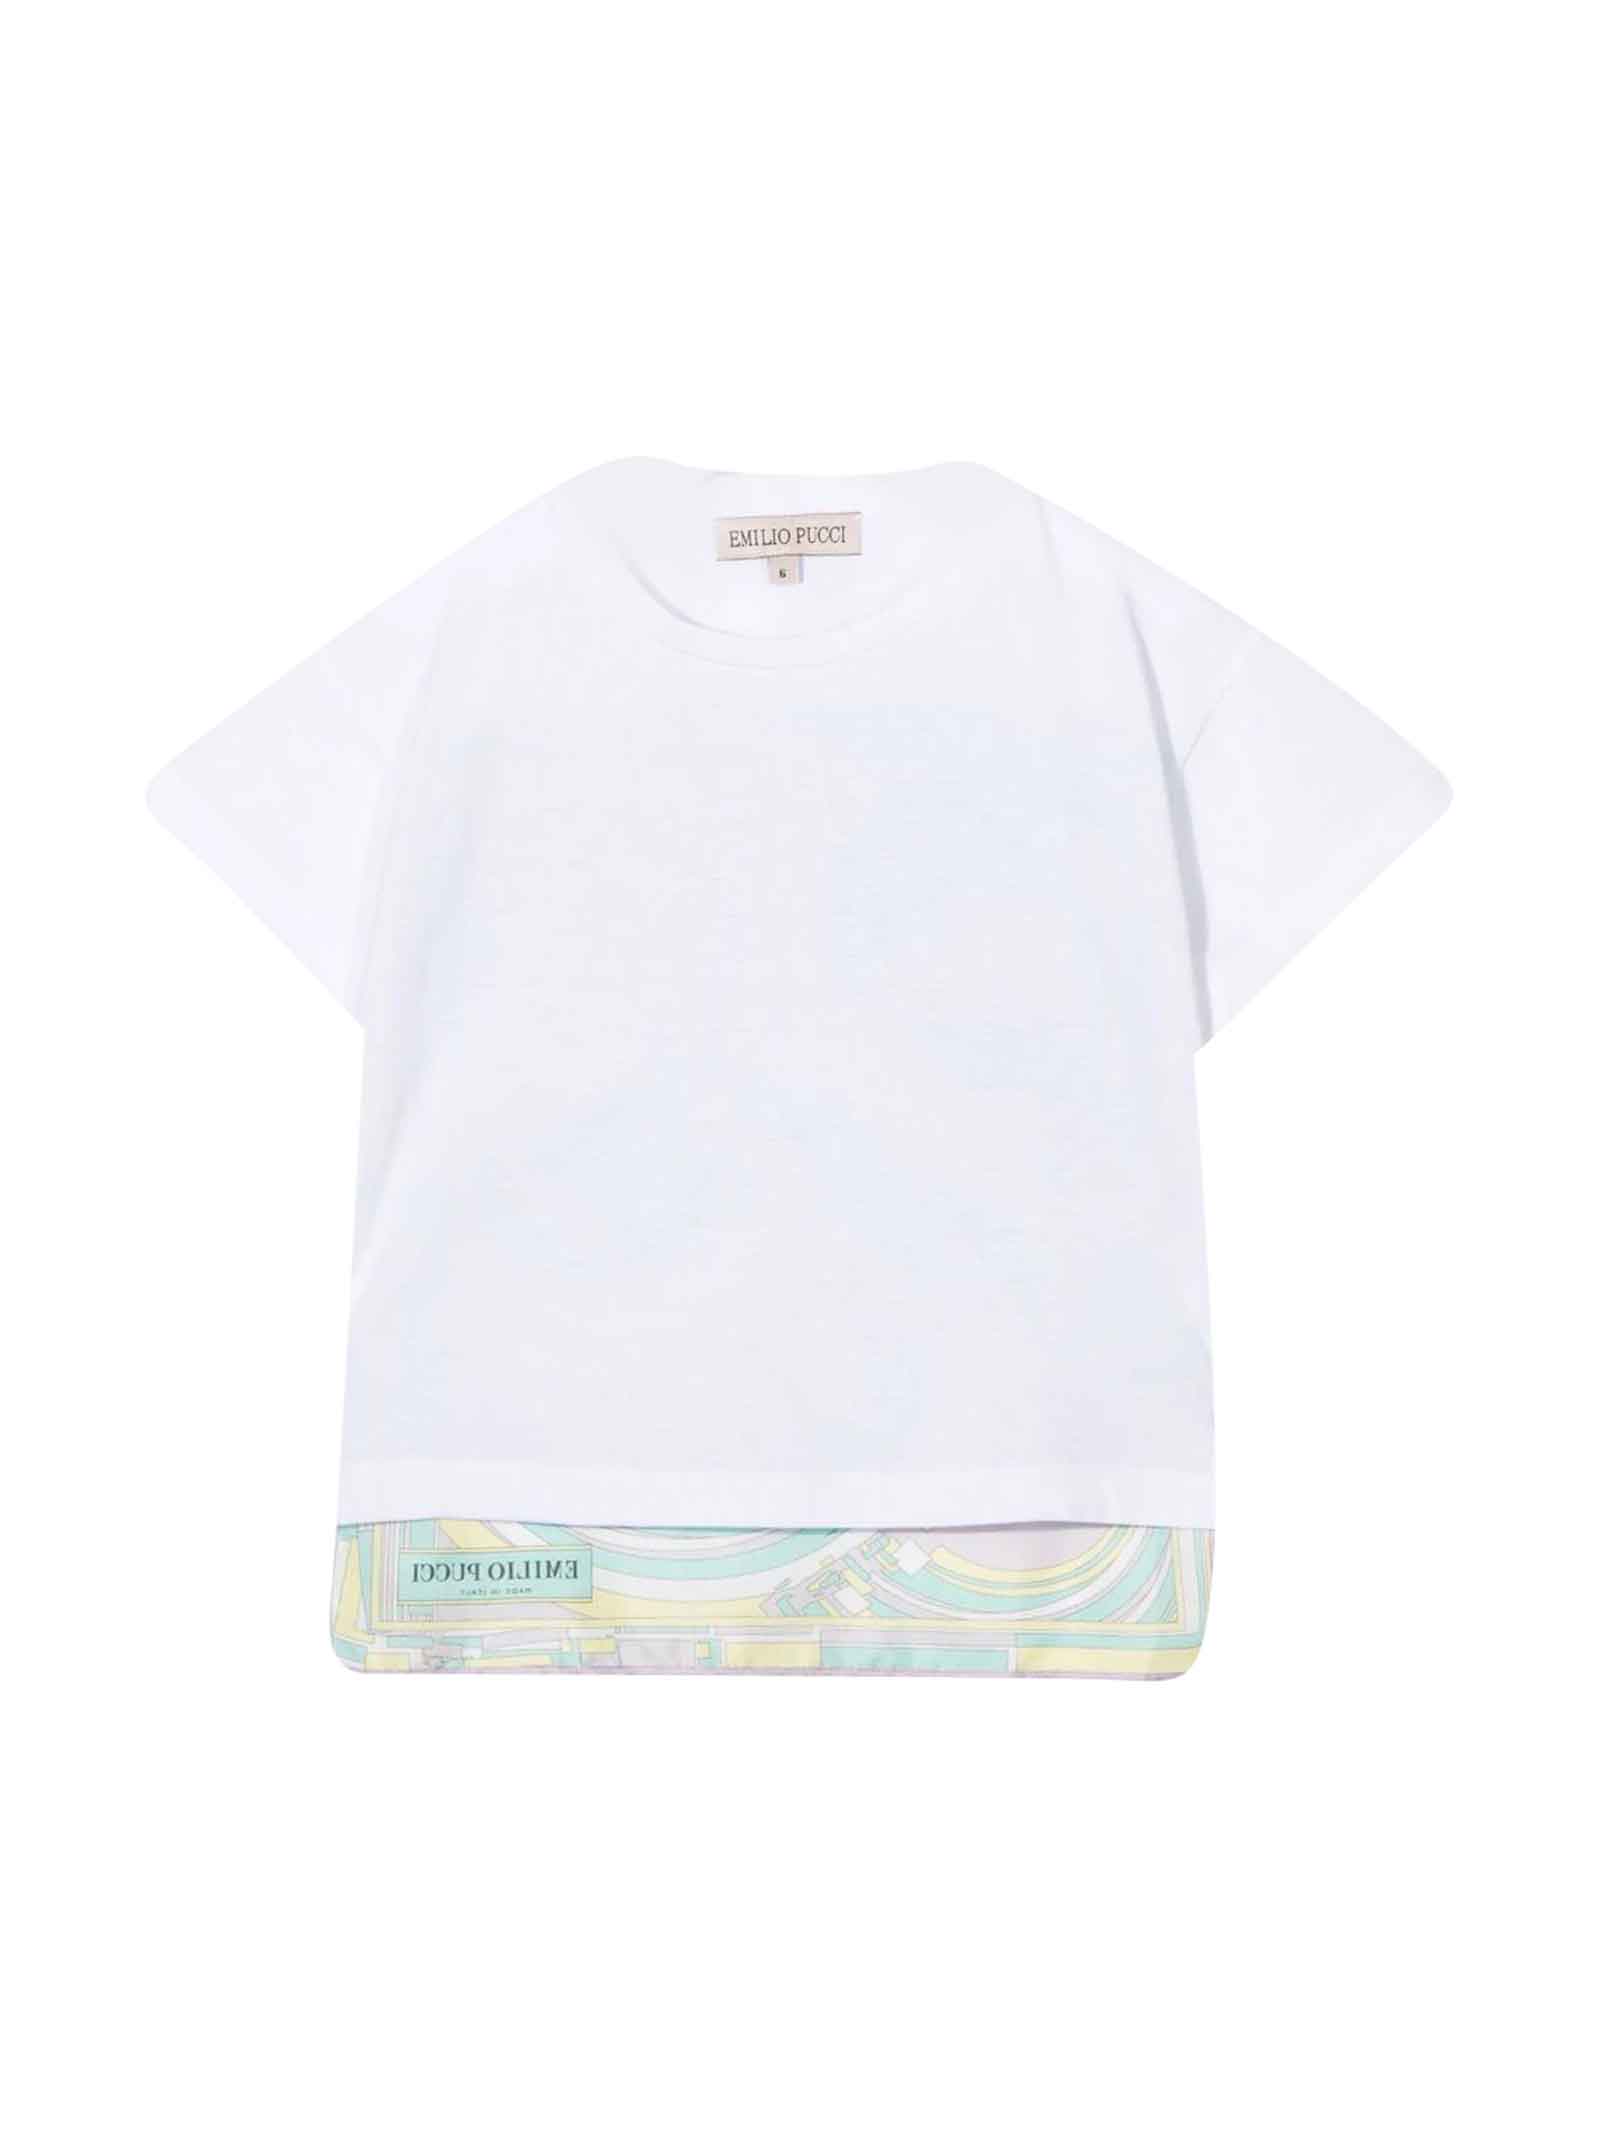 Emilio Pucci Girls T-shirt With Insert Logo Print On The Back, Multicolored Print, Round Neckline, Short Sleeves And Straight Hem.